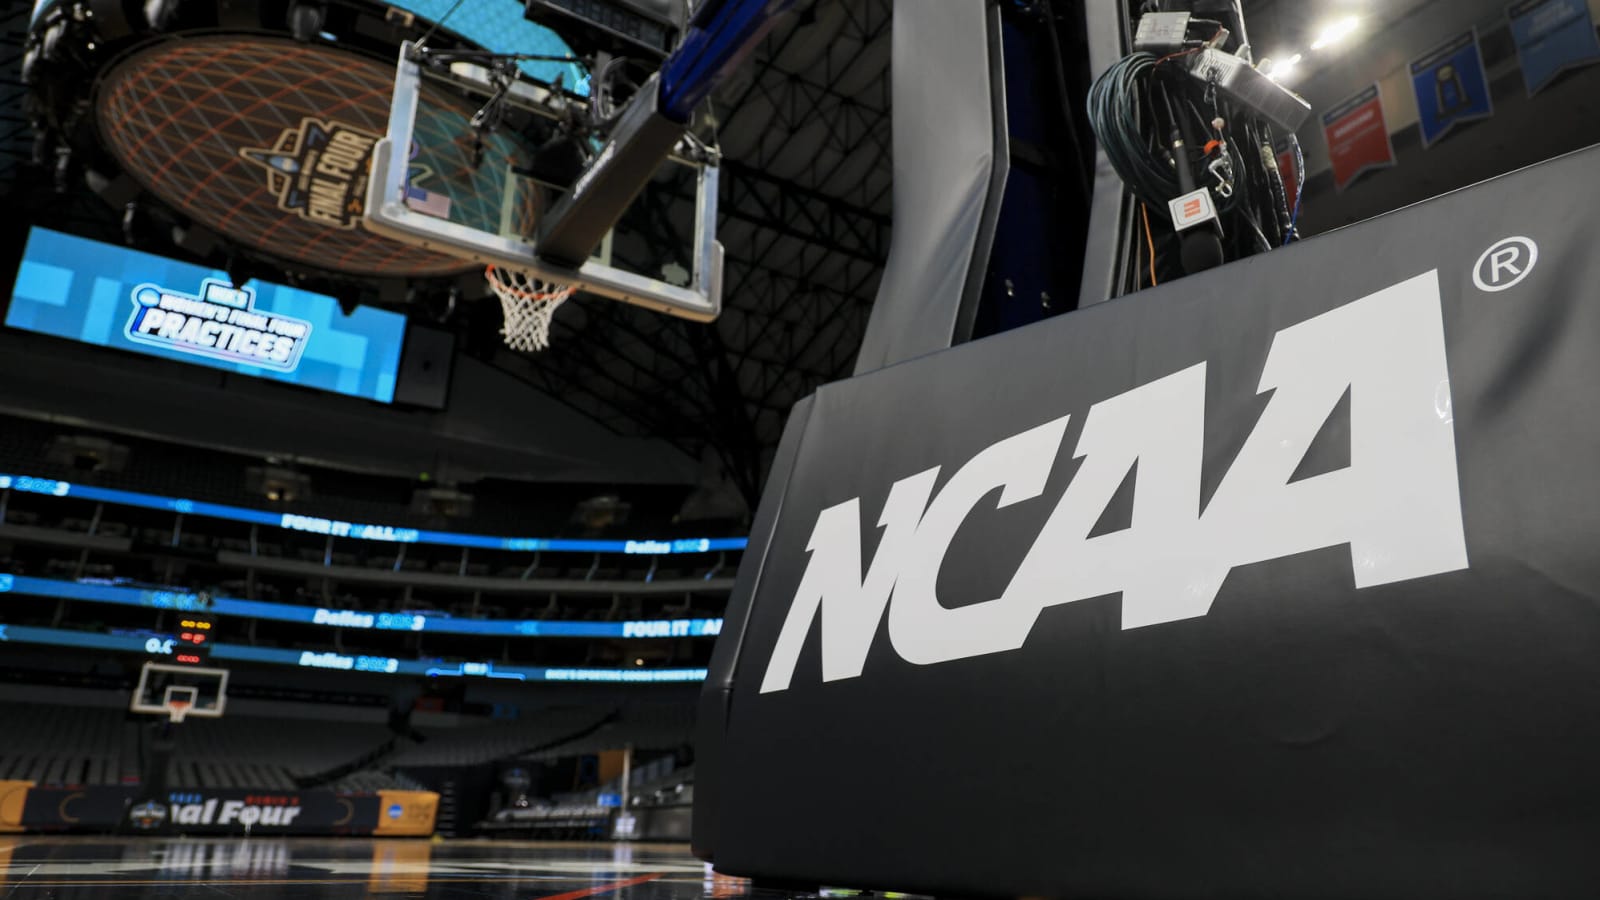 Final Four ticket prices laughably low due to semifinalist group